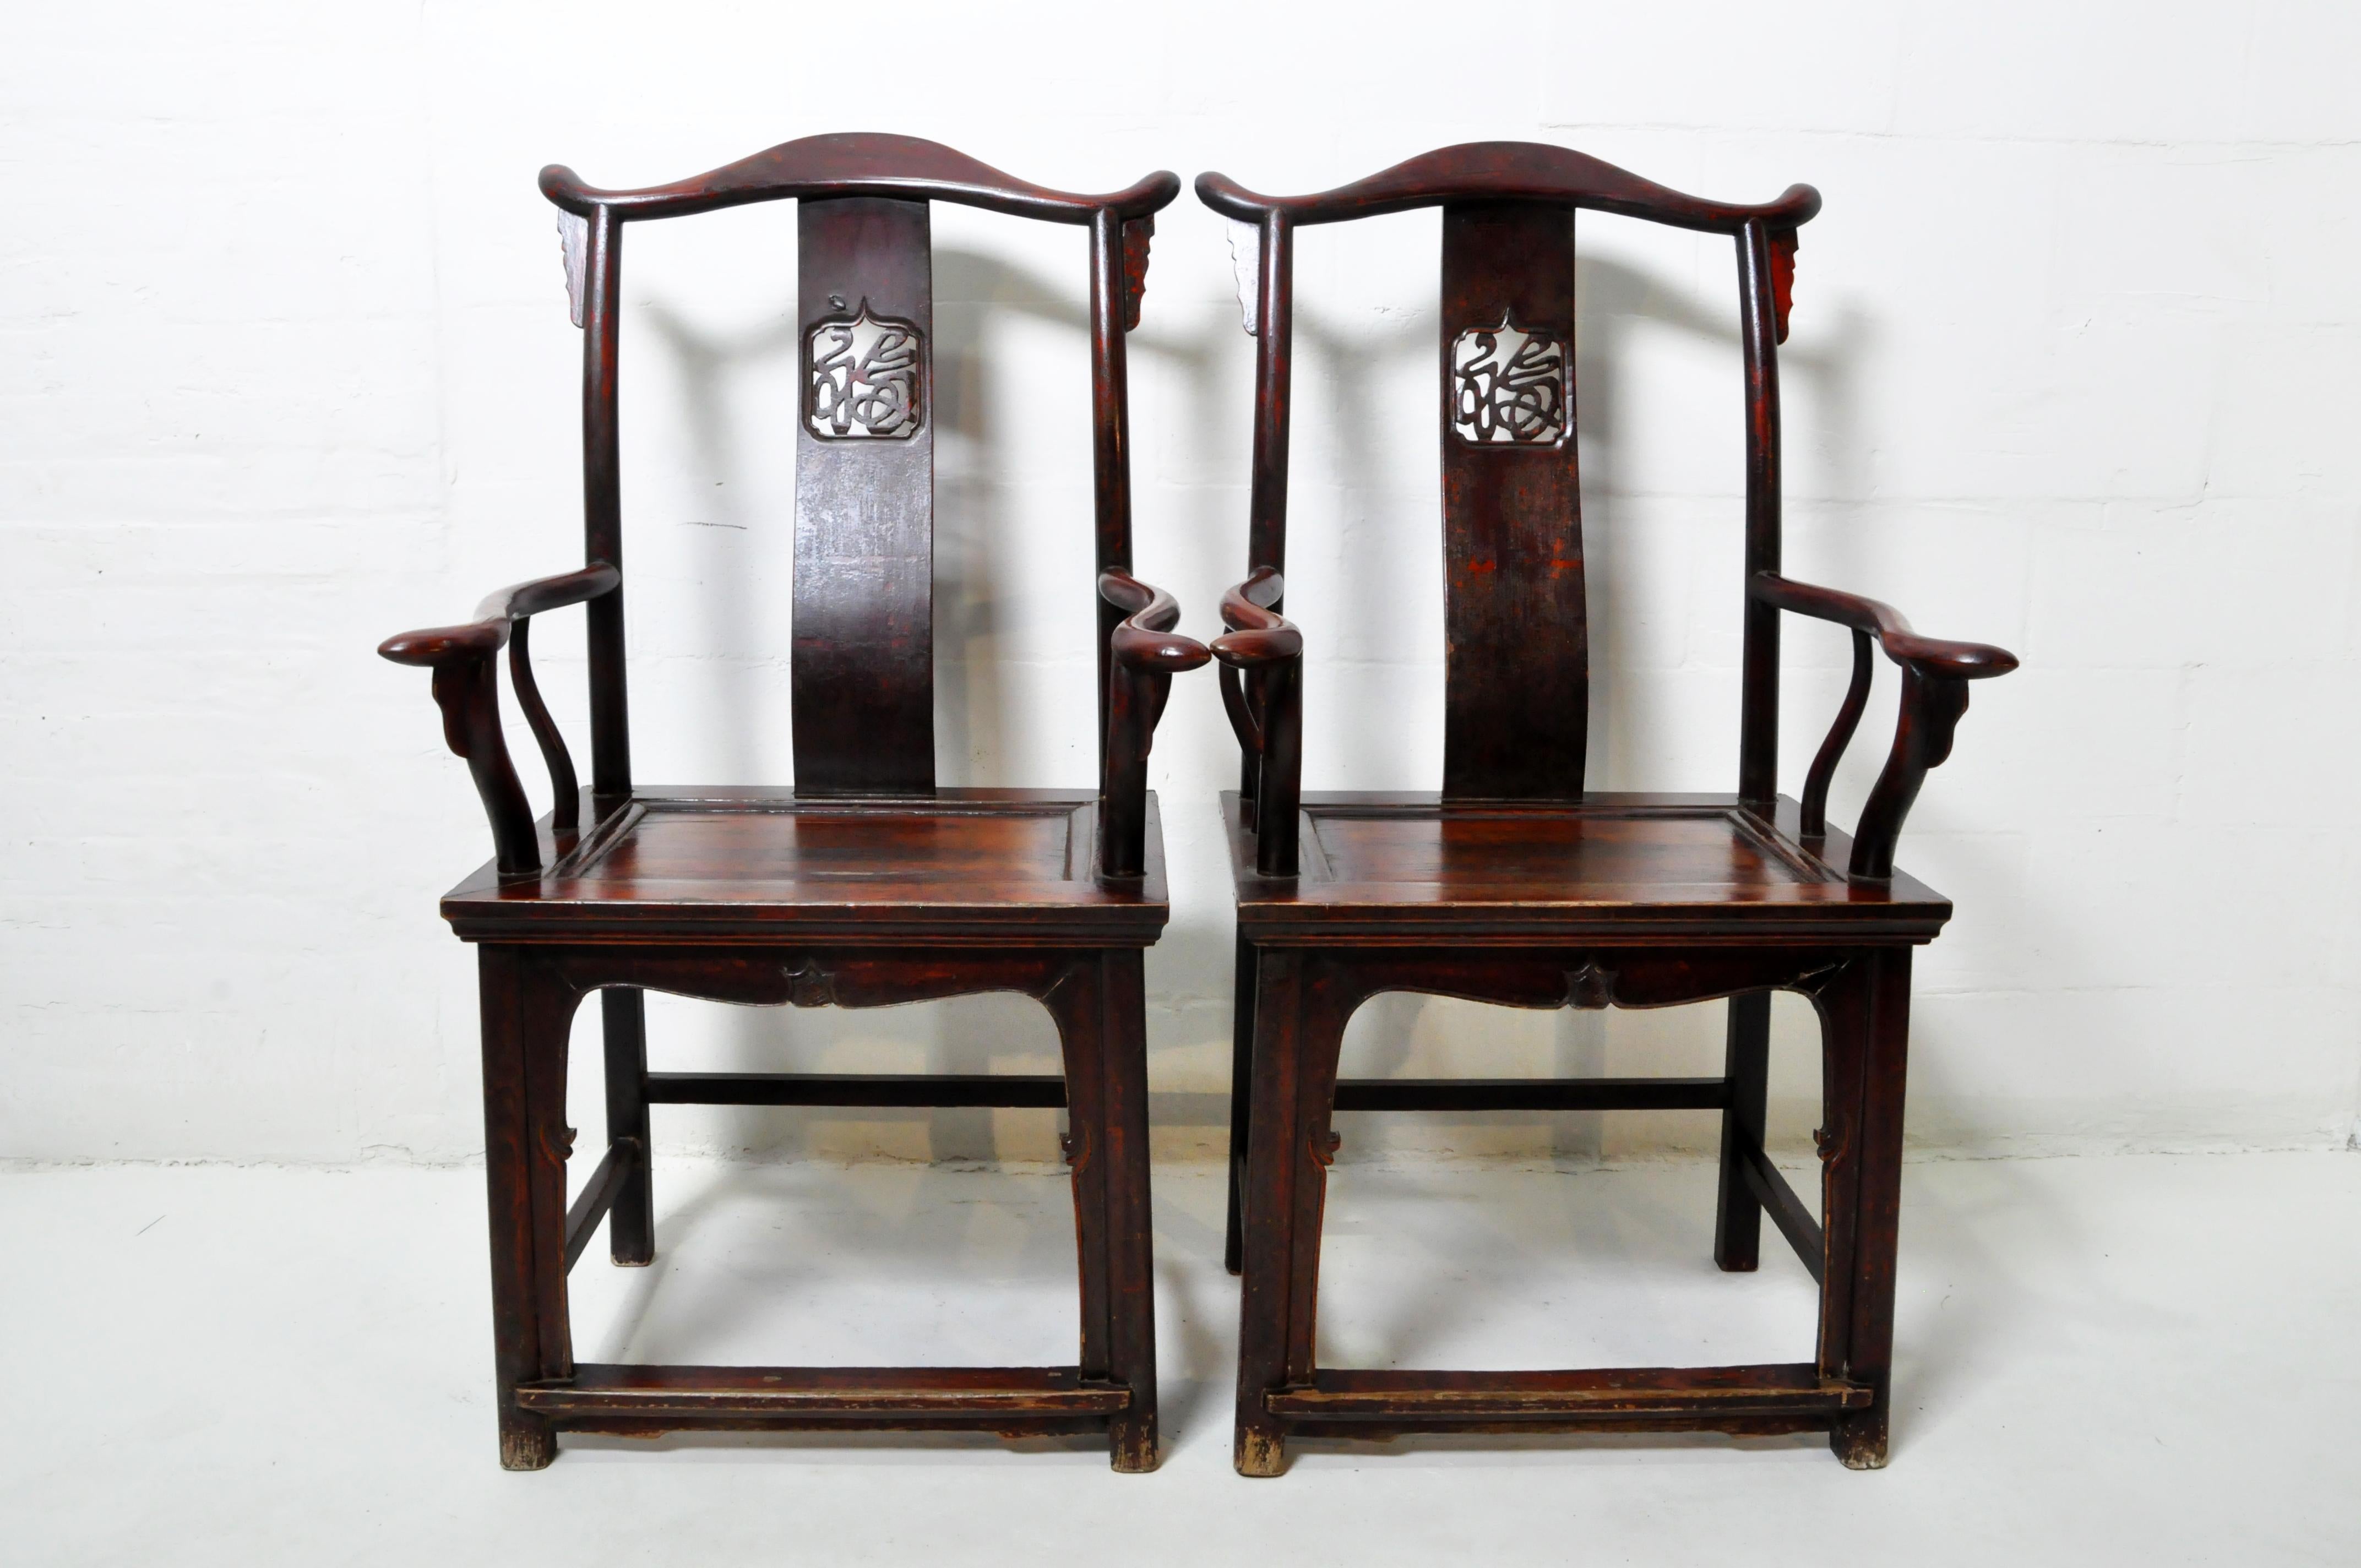 Made from Elm Wood with mortise-and-tenon joinery, these chairs are as sturdy as they are beautiful.